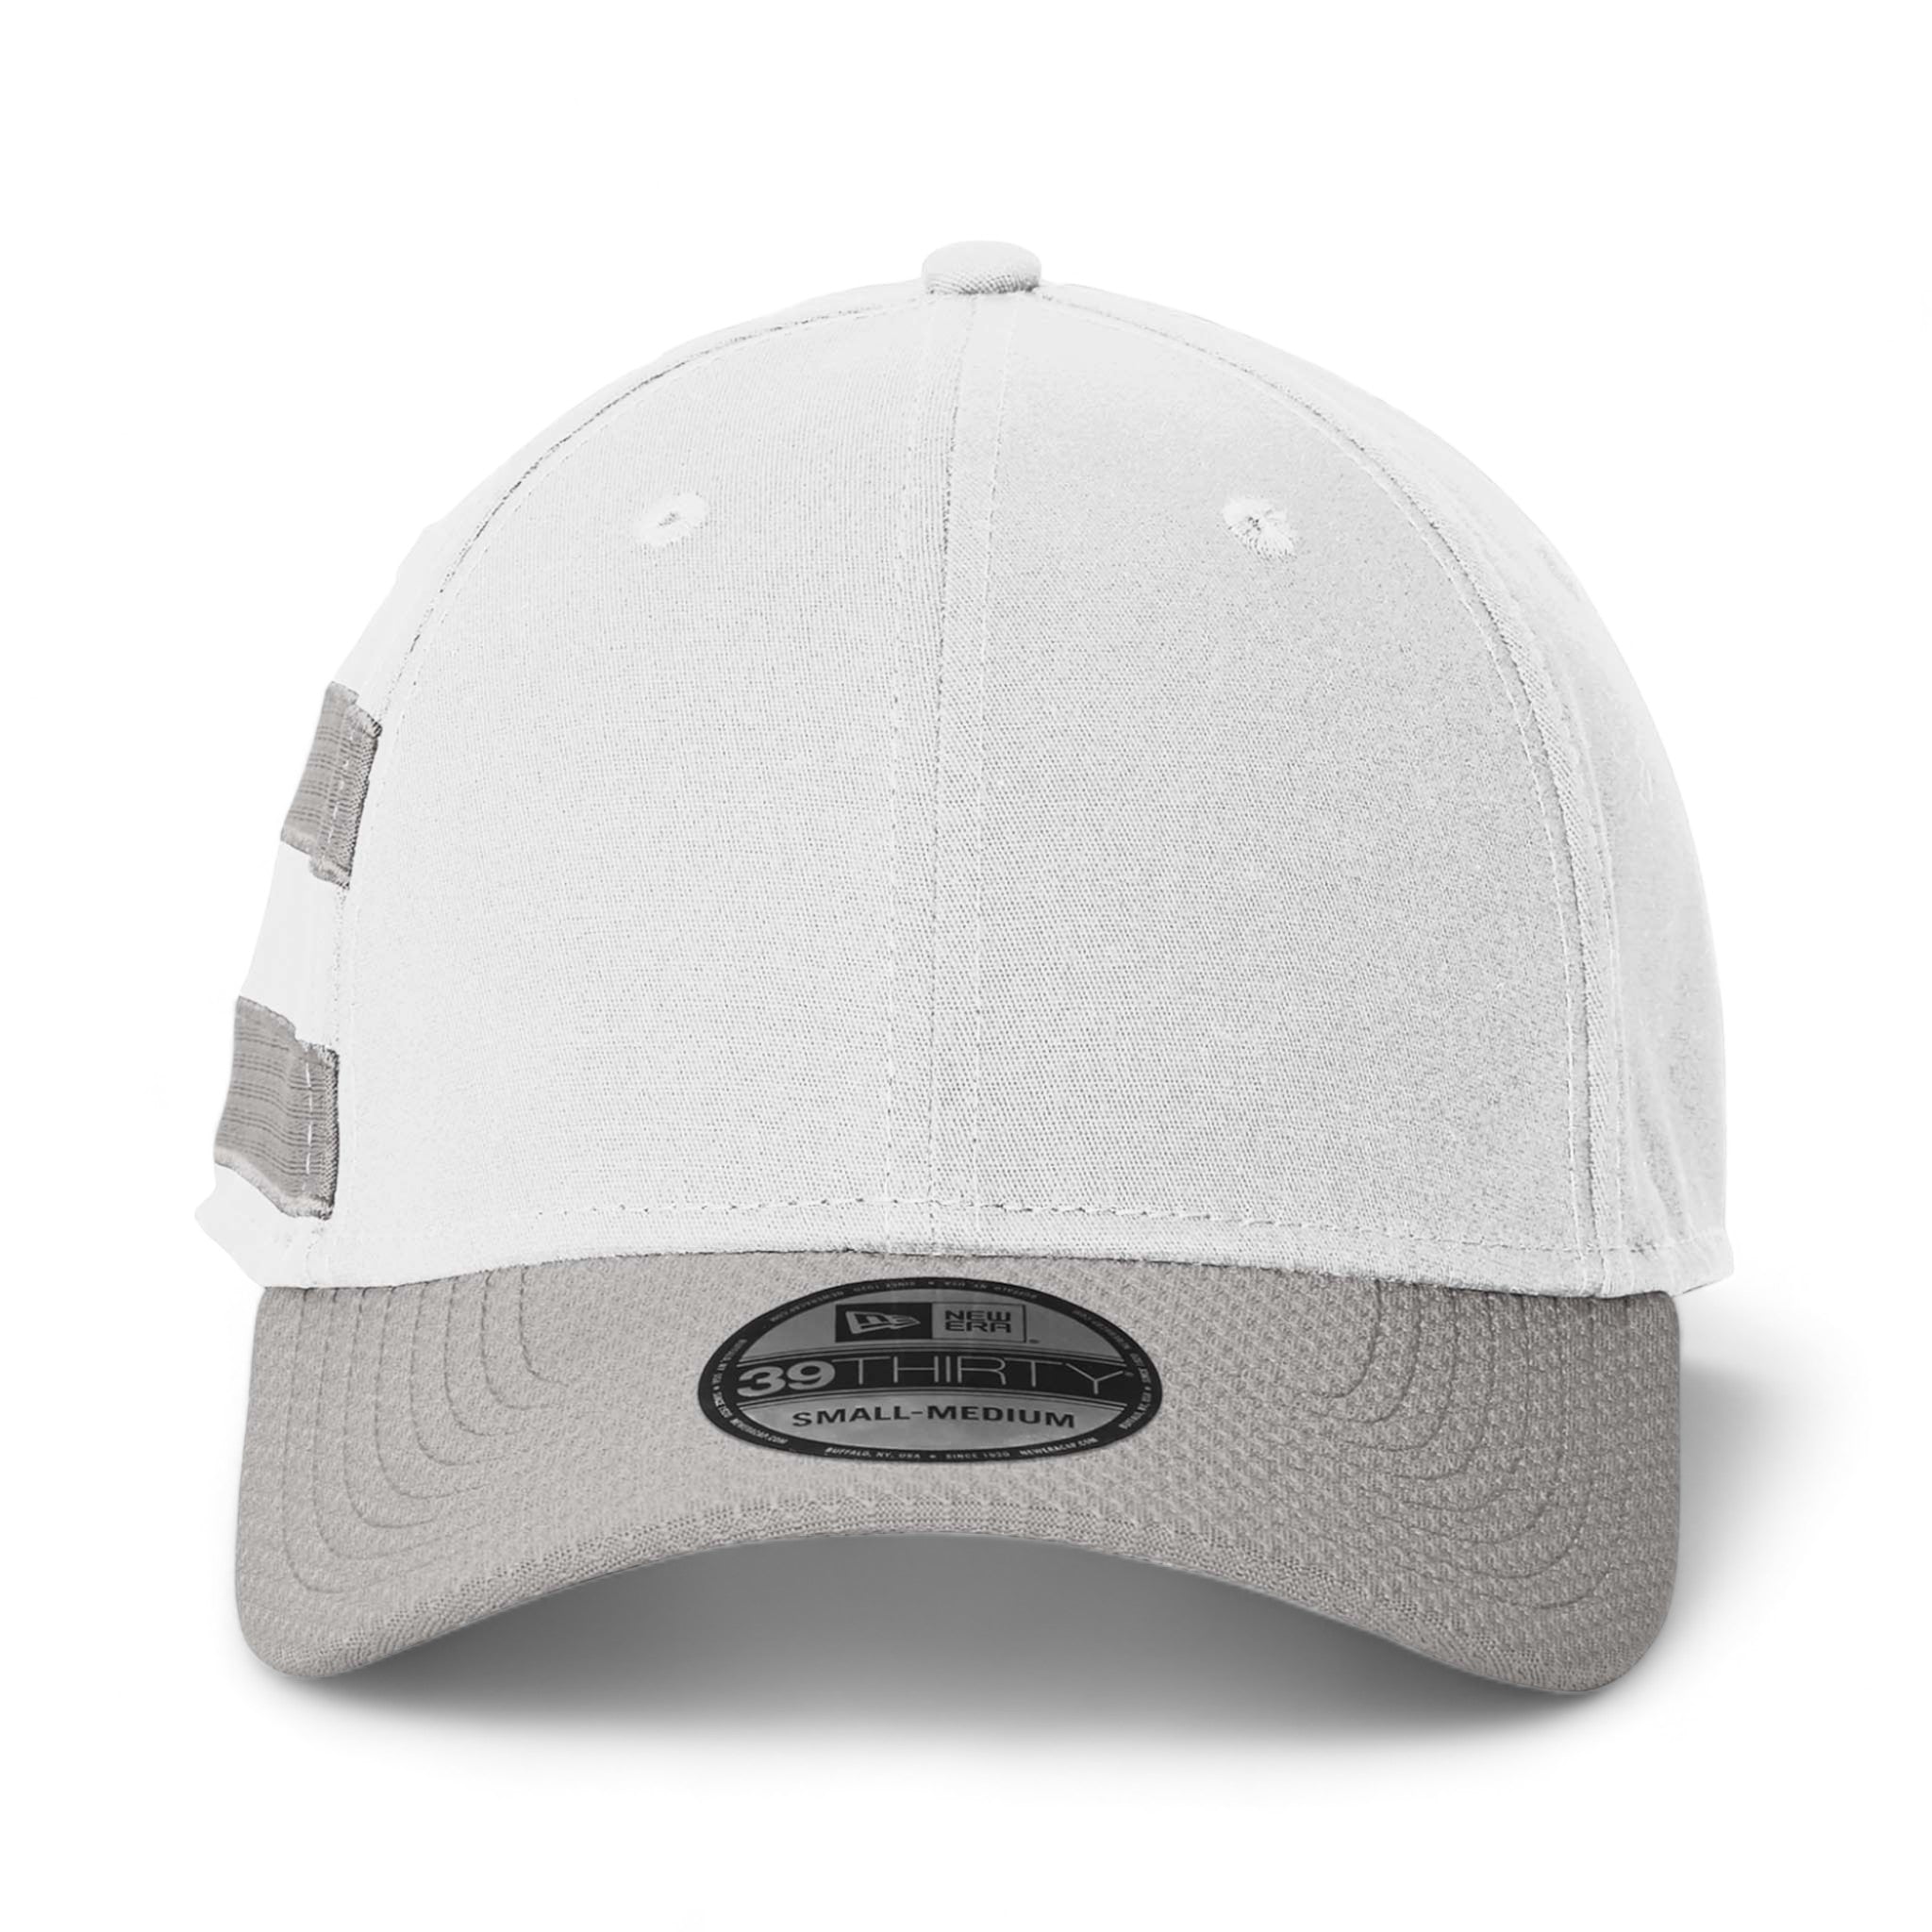 Front view of New Era NE1122 custom hat in white and grey